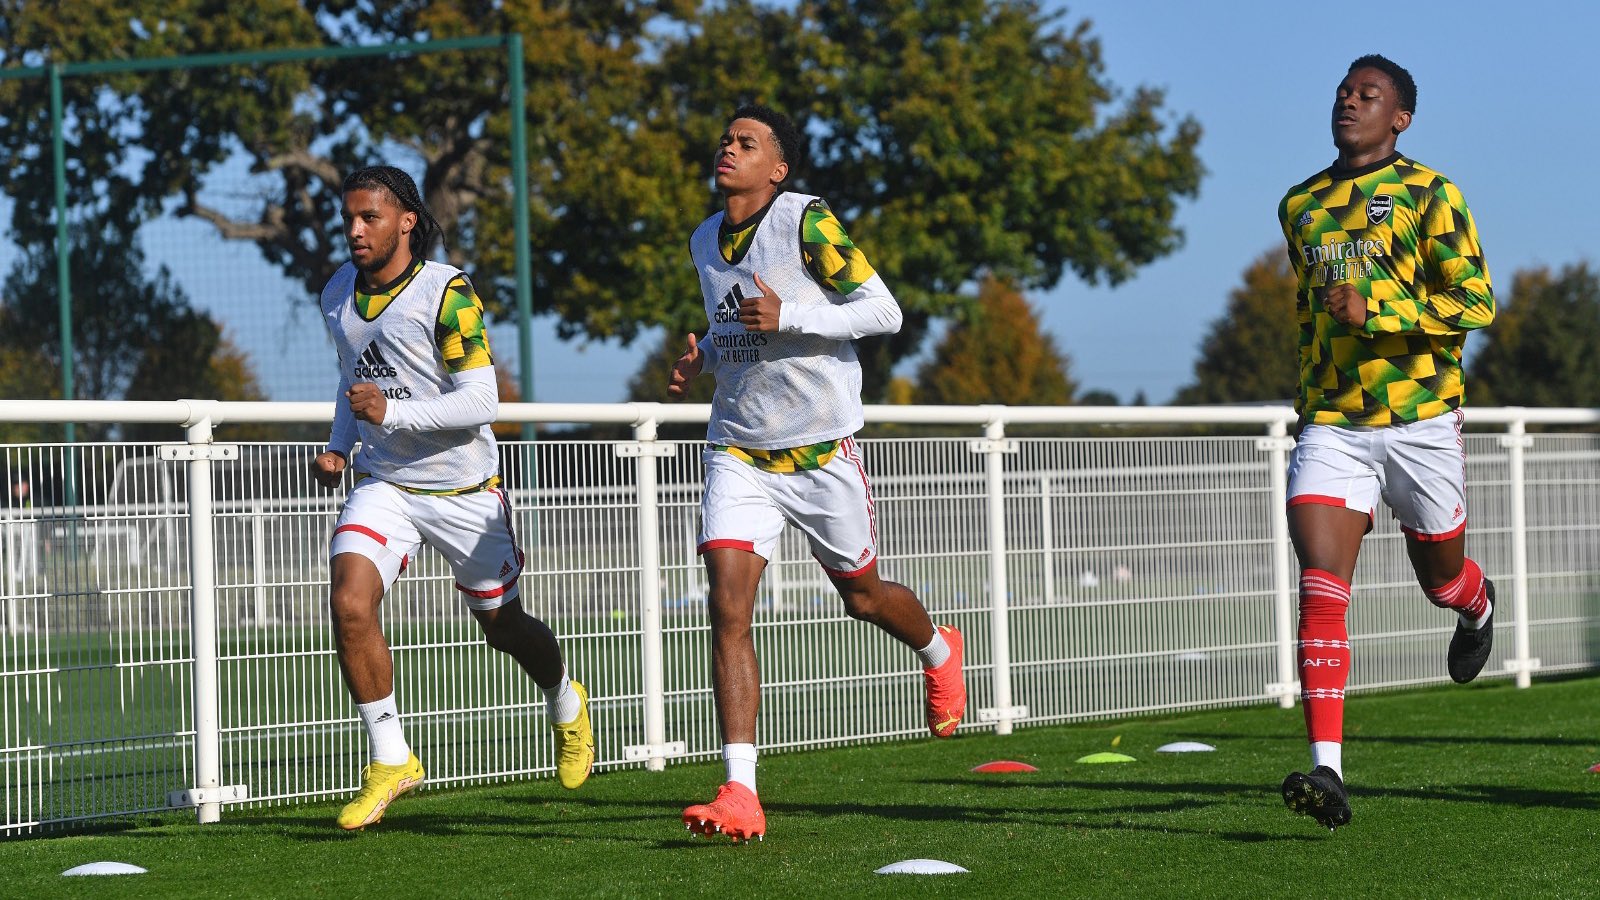 Arsenal call 4 youngsters up for first-team training pre-Bodo/Glimt